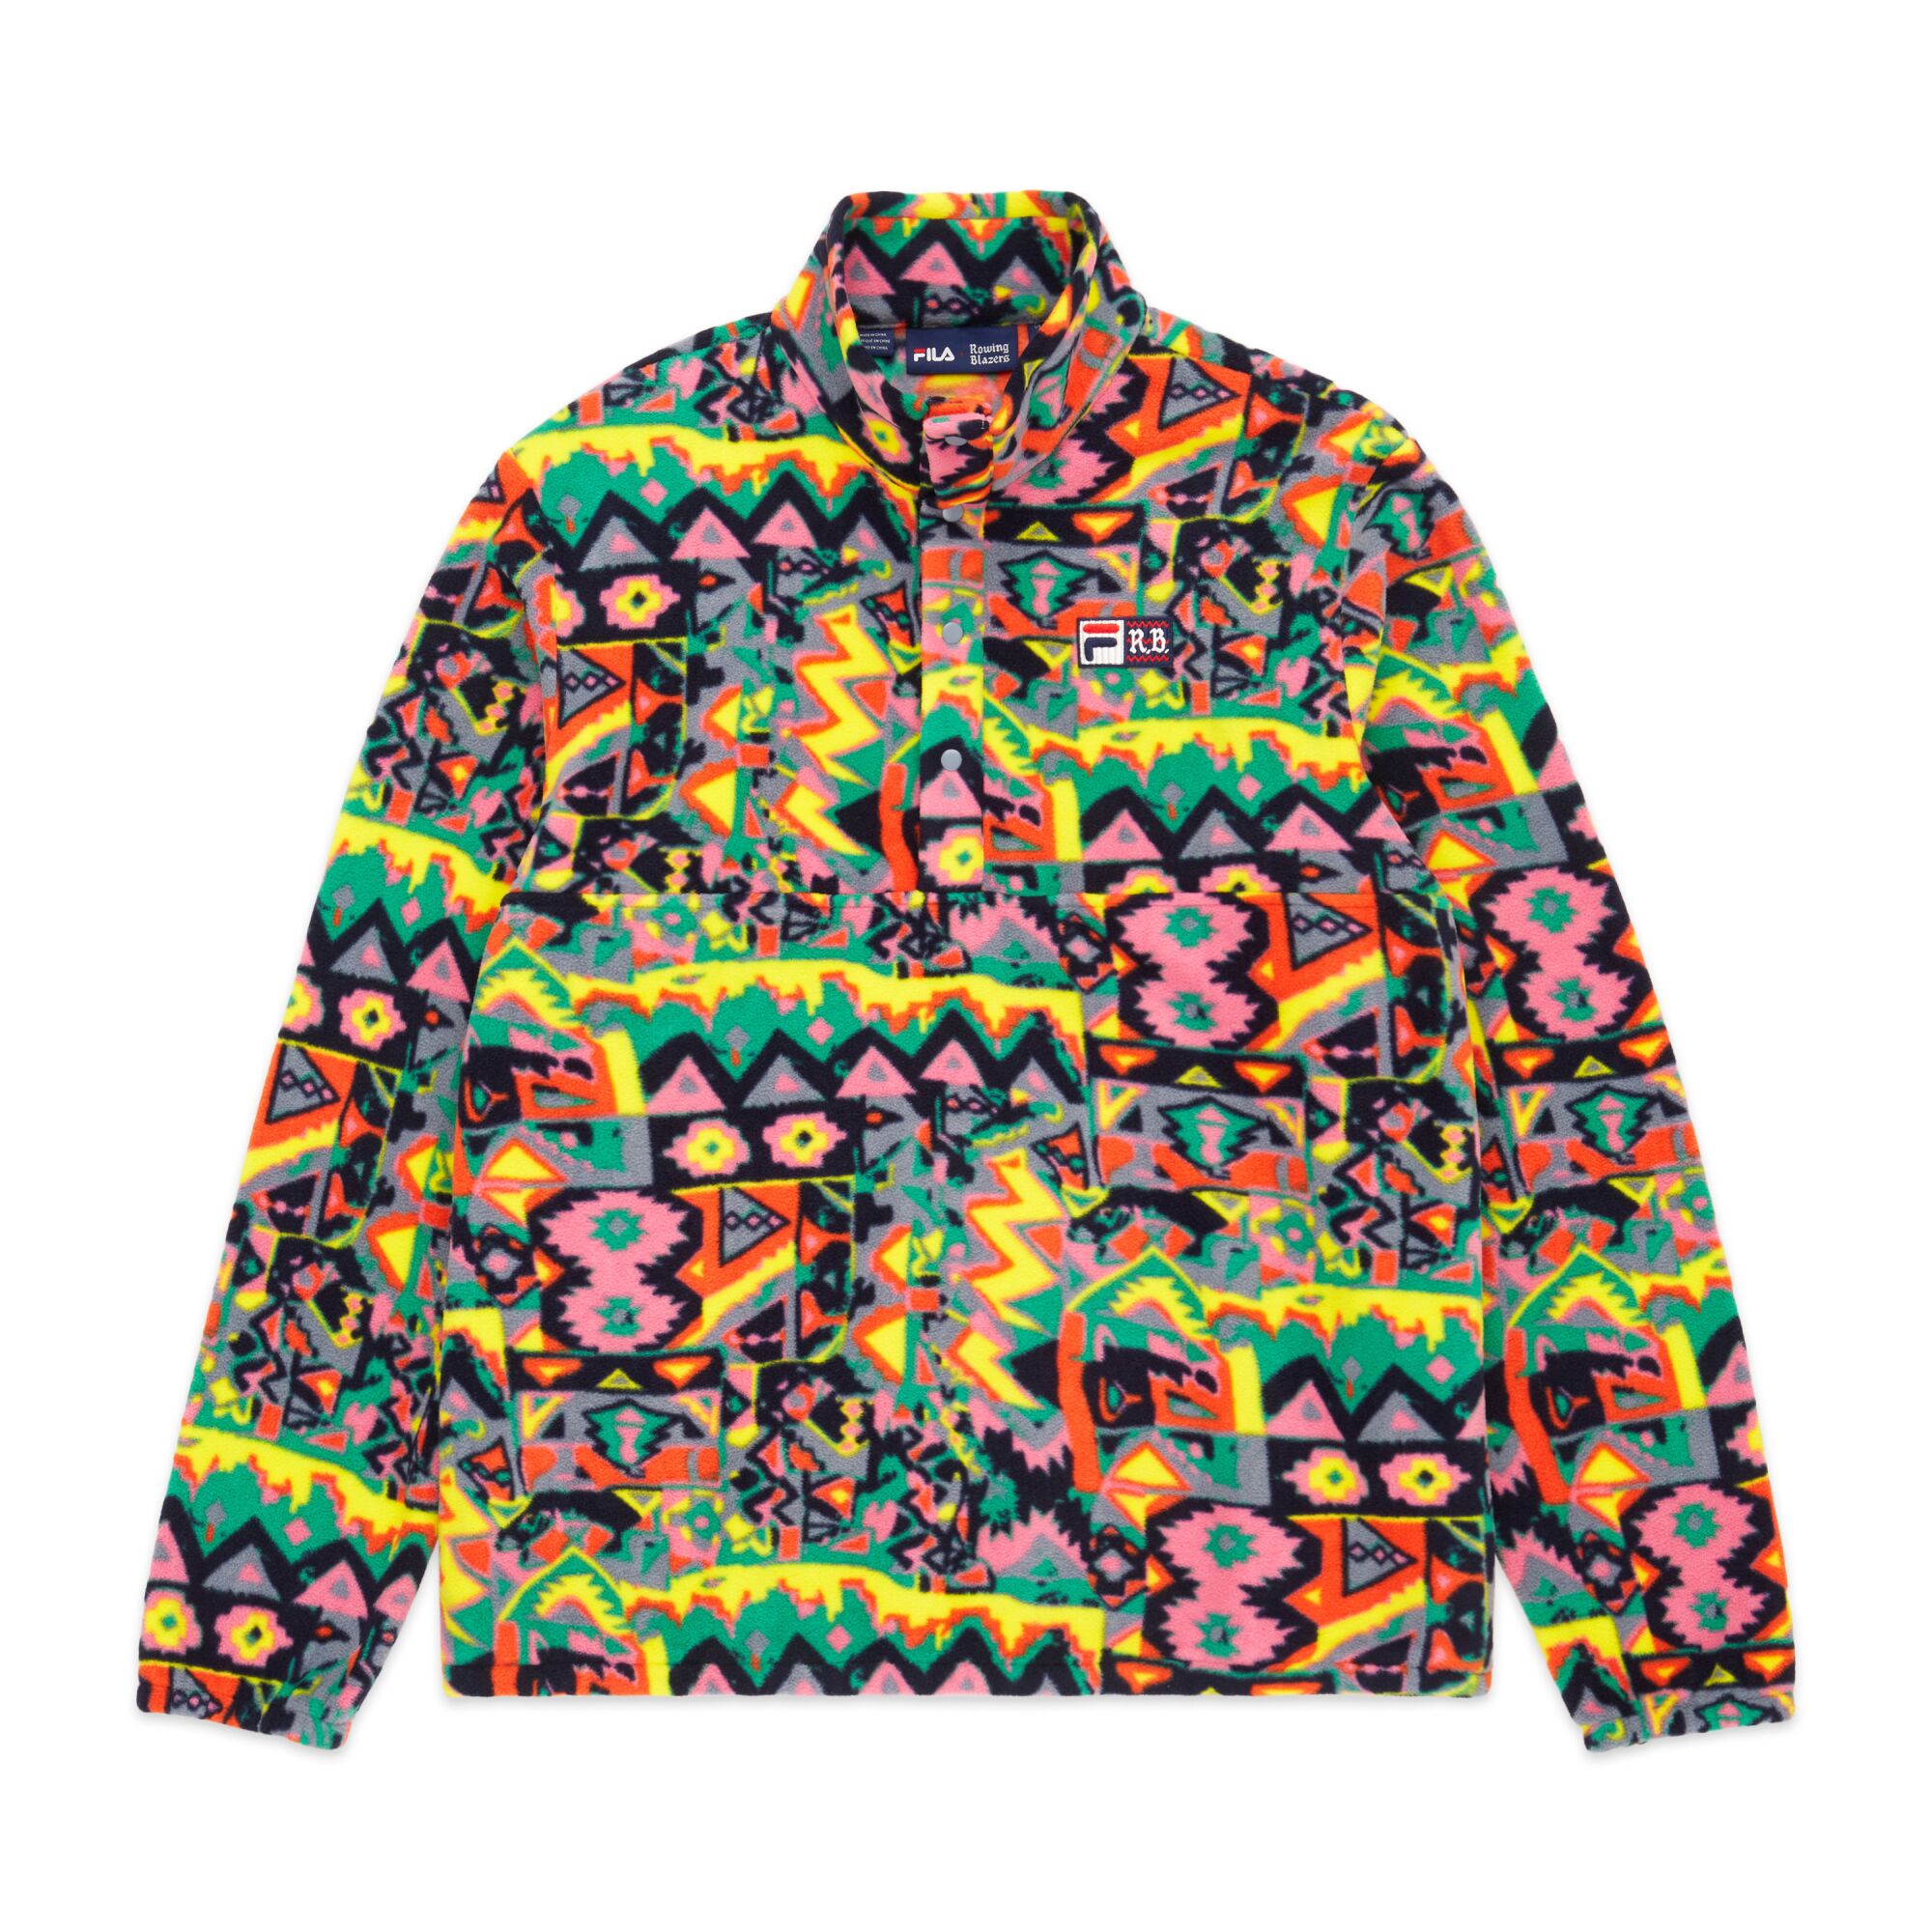 A fleece jacket with a colorful all-over print